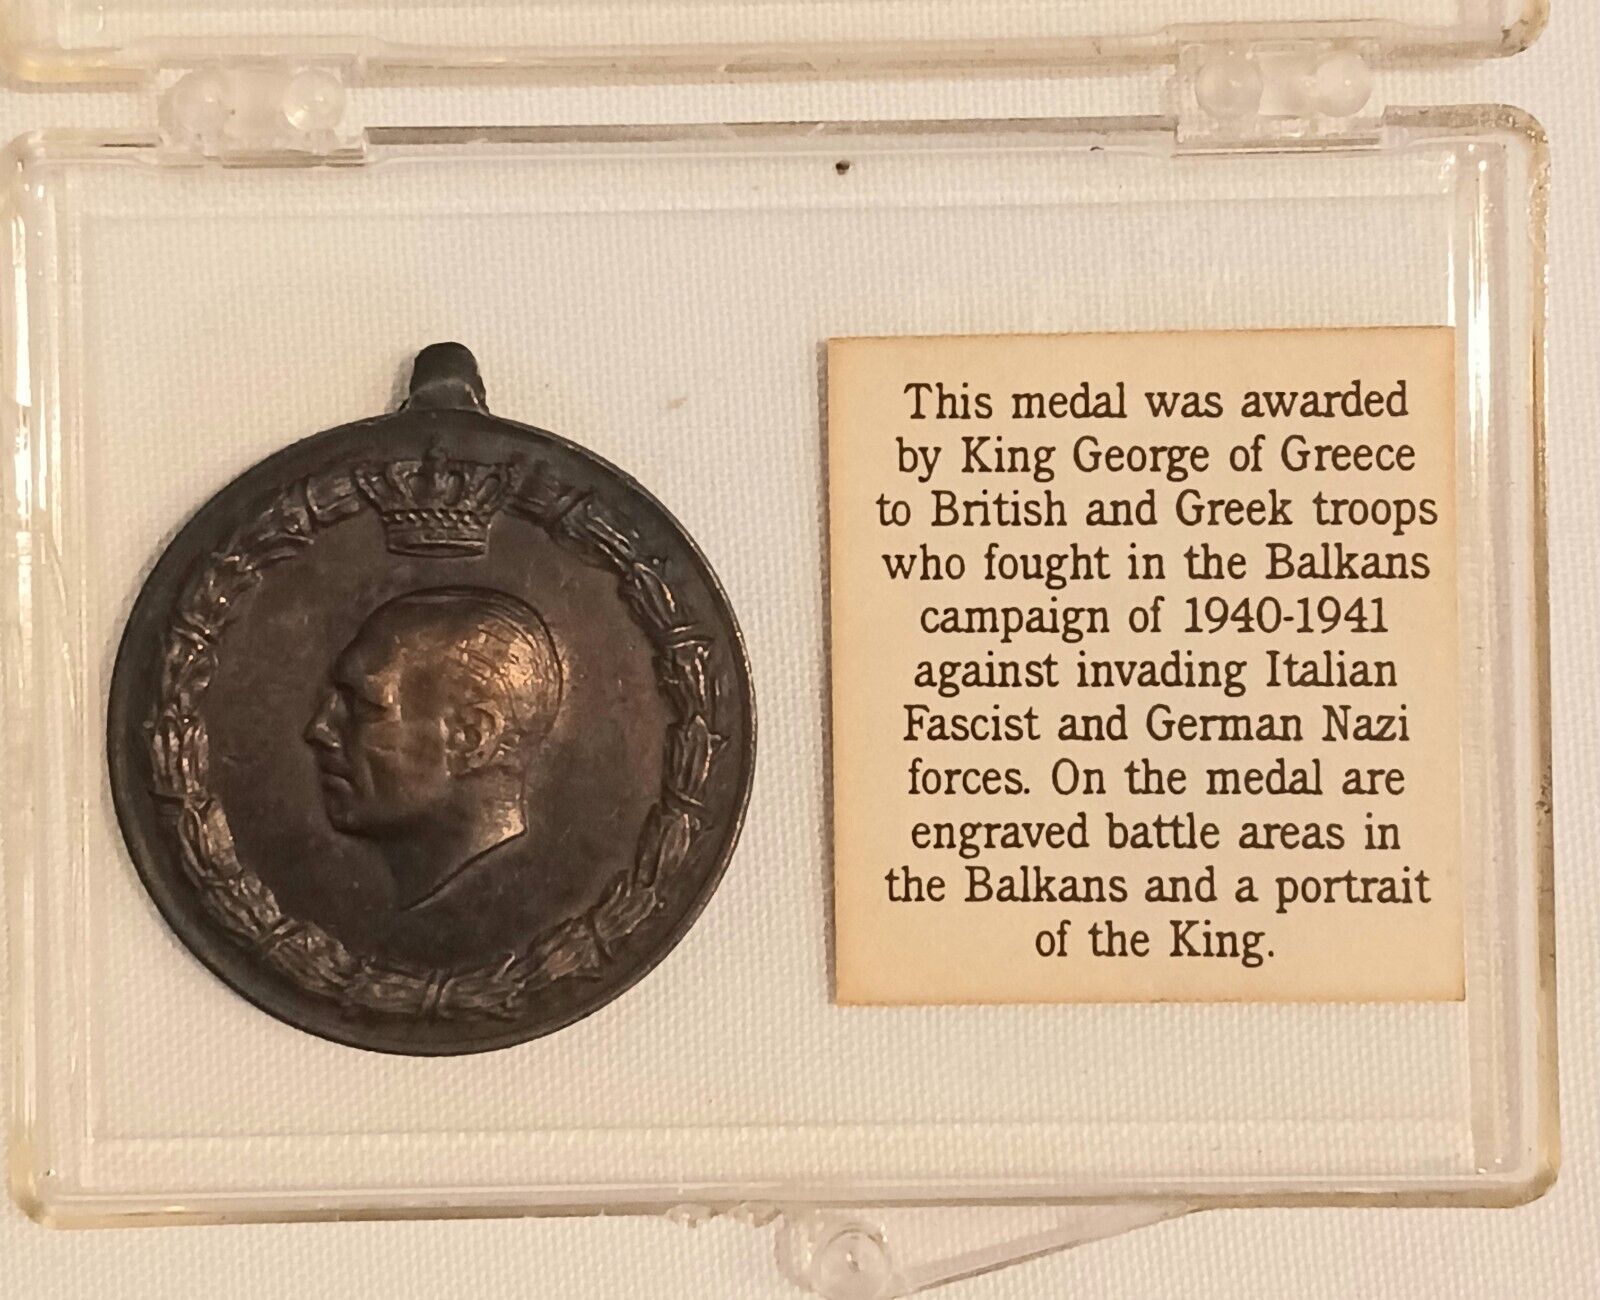 Commemorative War Medal By King George of Greece for Balkans Campaign 1940-1941